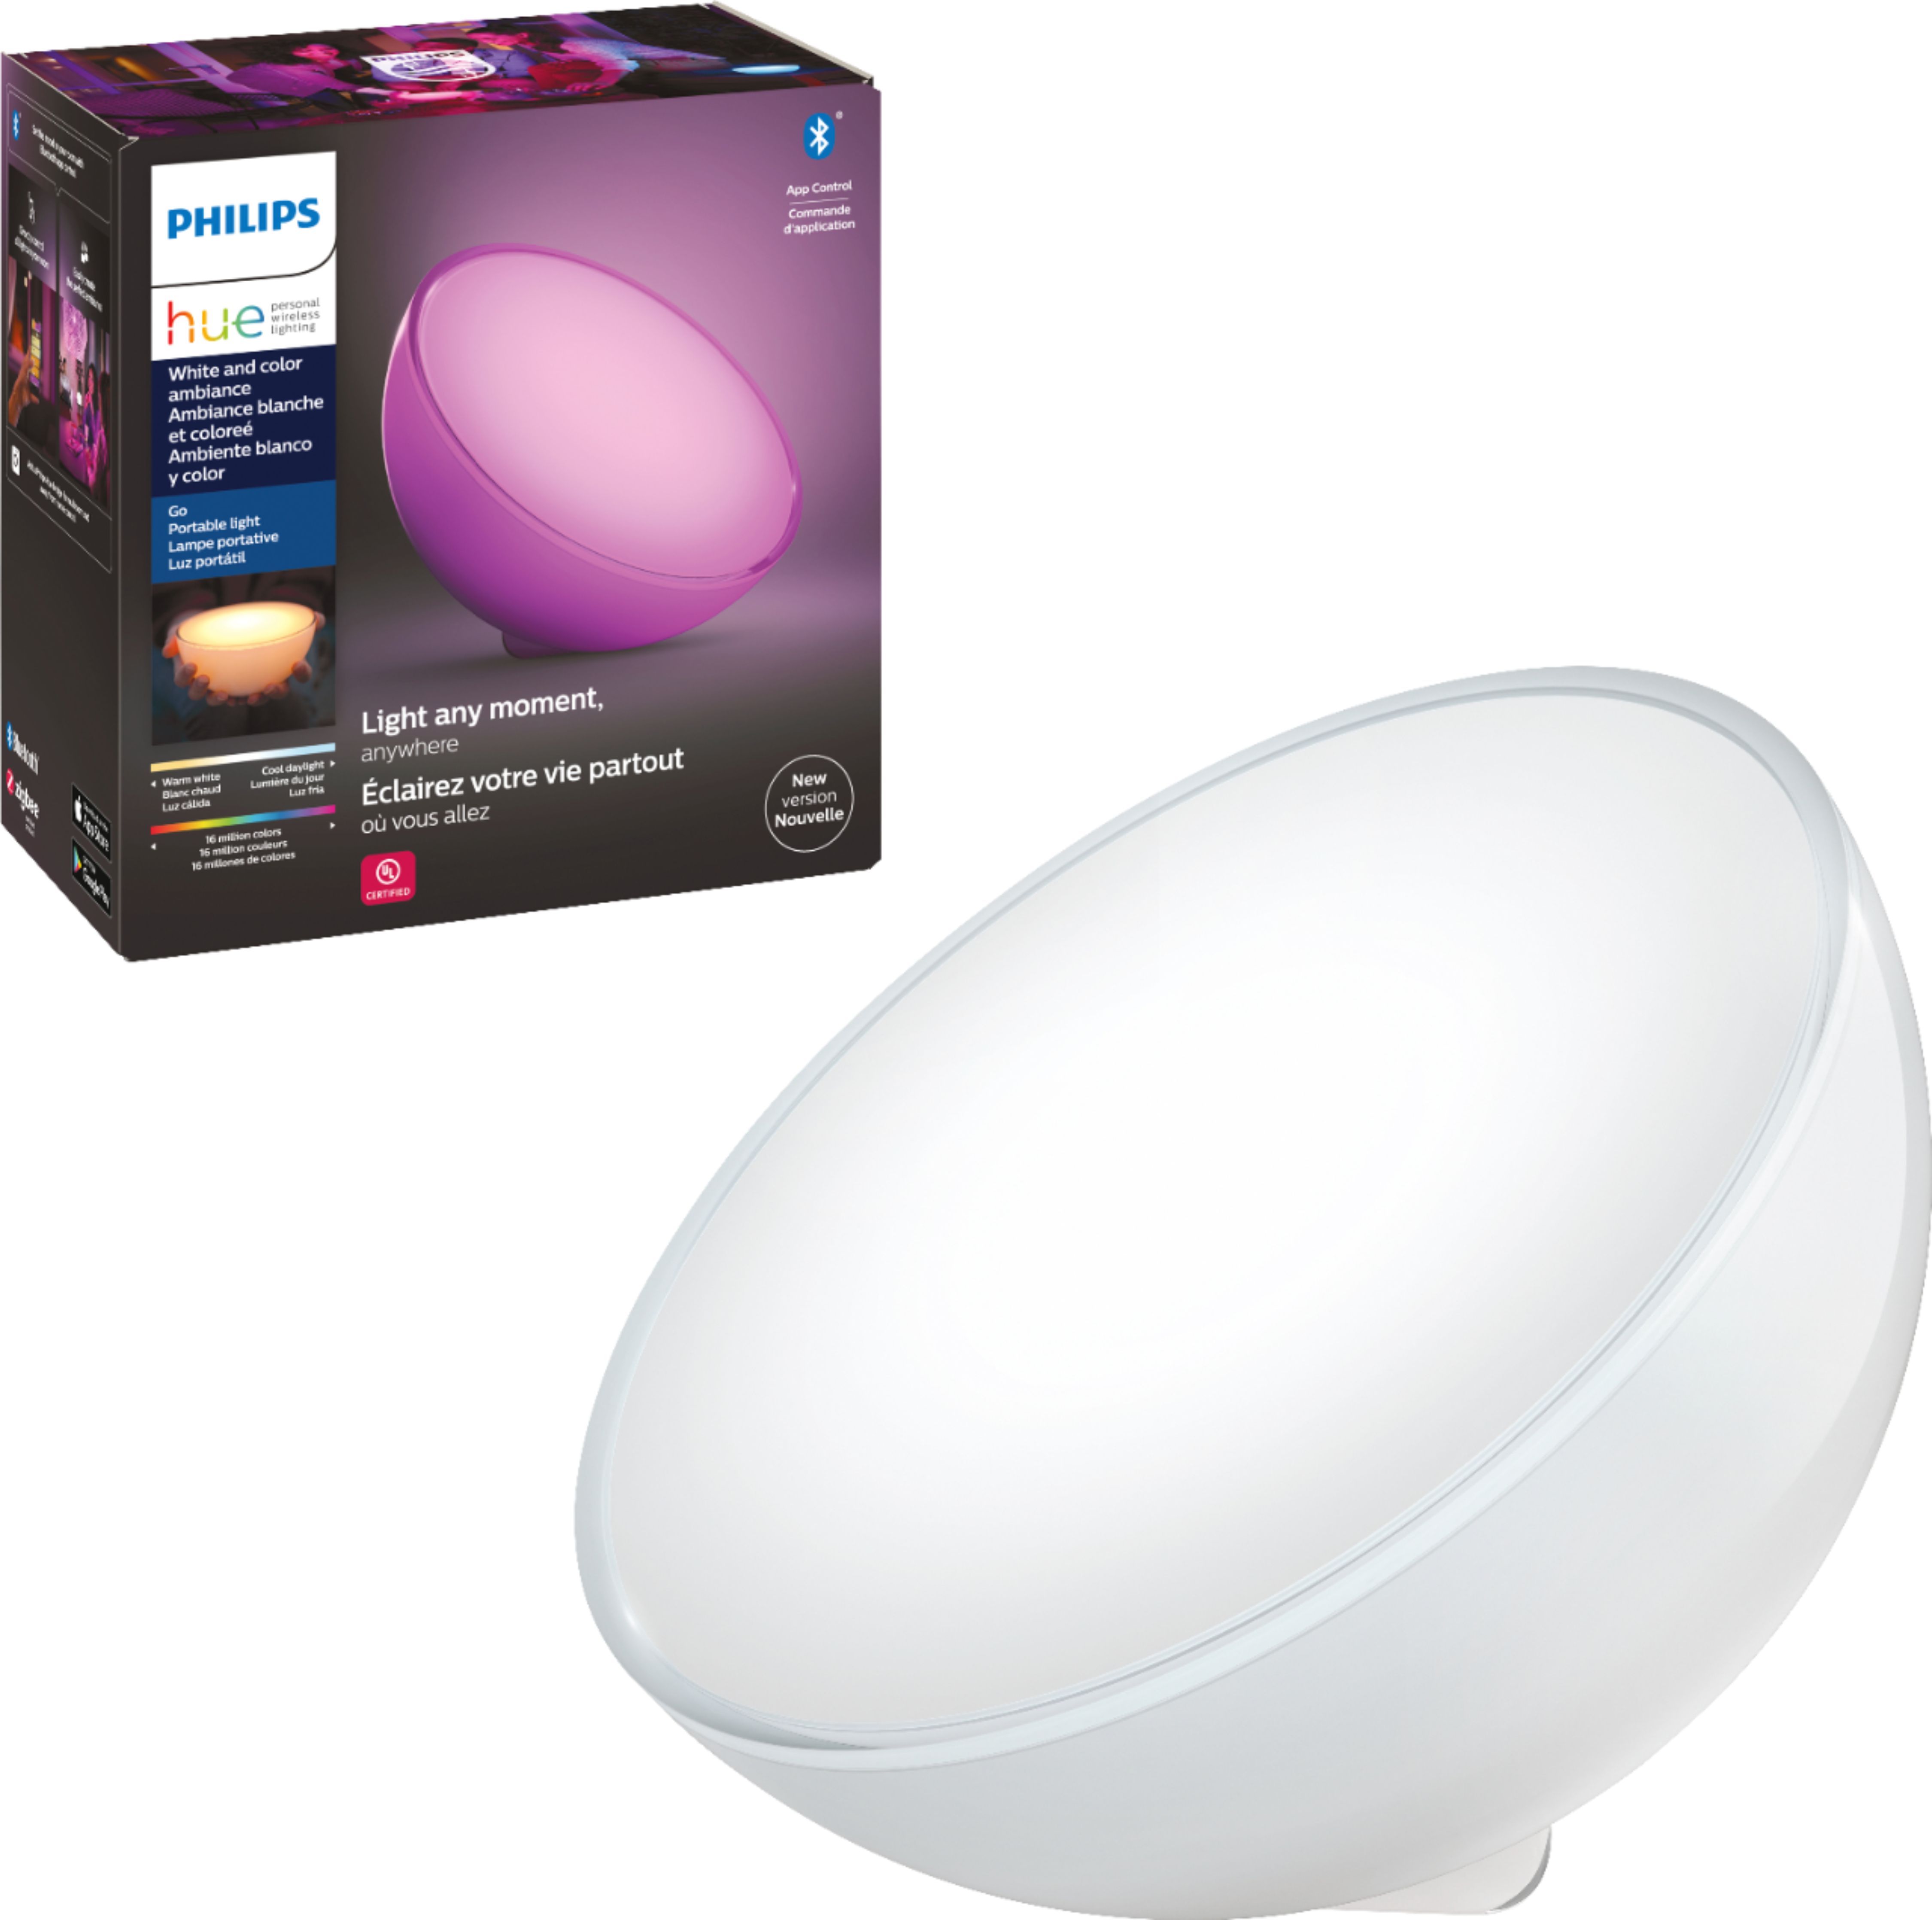 Philips Hue White & Color Ambiance Go Table Lamp White 7602031 - Best Buy | Best Buy U.S.